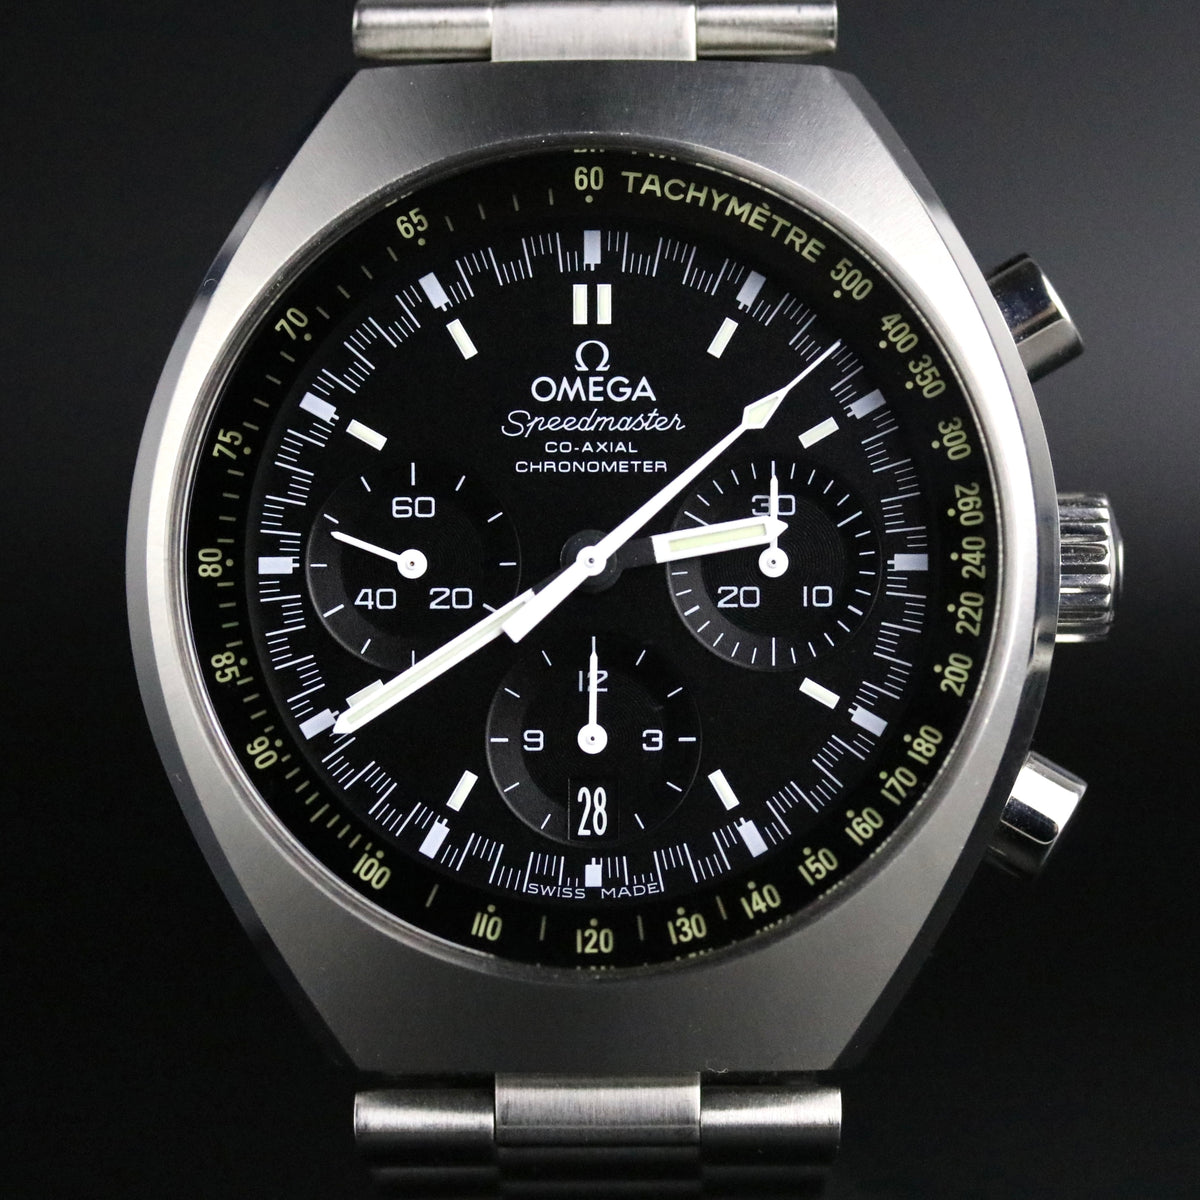 2014 OMEGA 327.10.43.50.001 Speedmaster MK-II Co-Axial Black Dial with Card